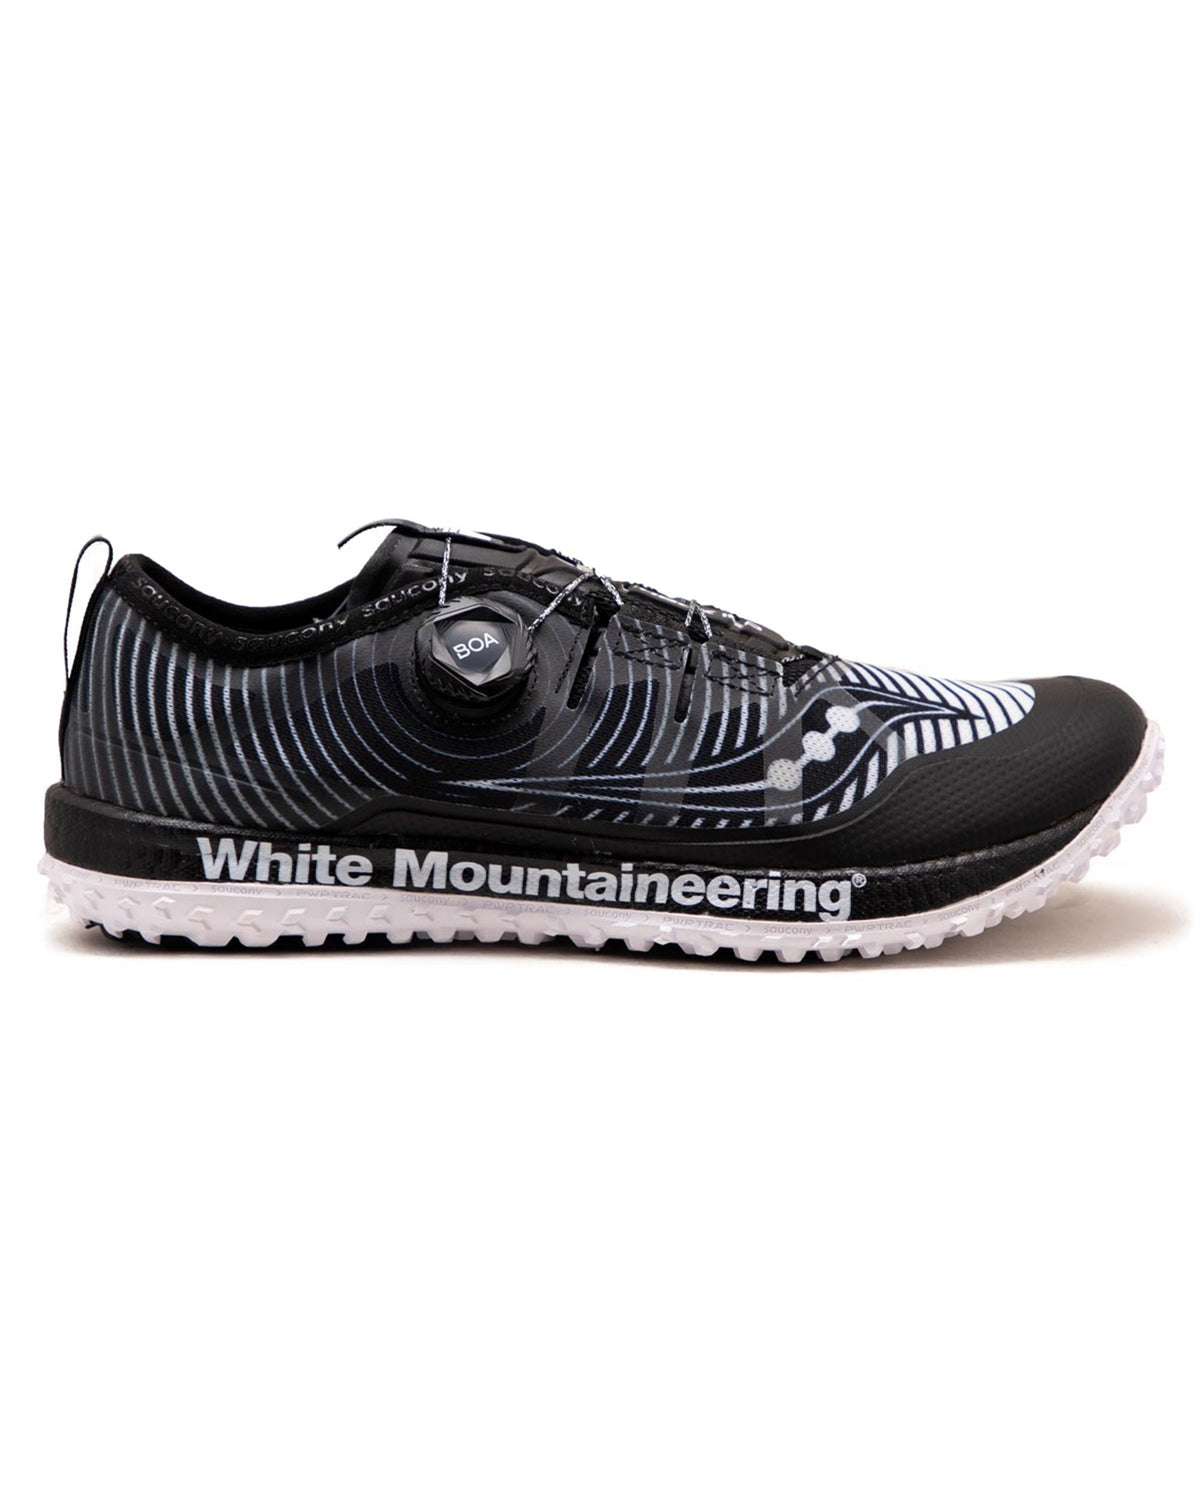 White Mountainering X Saucony Switchback Black S20482-50